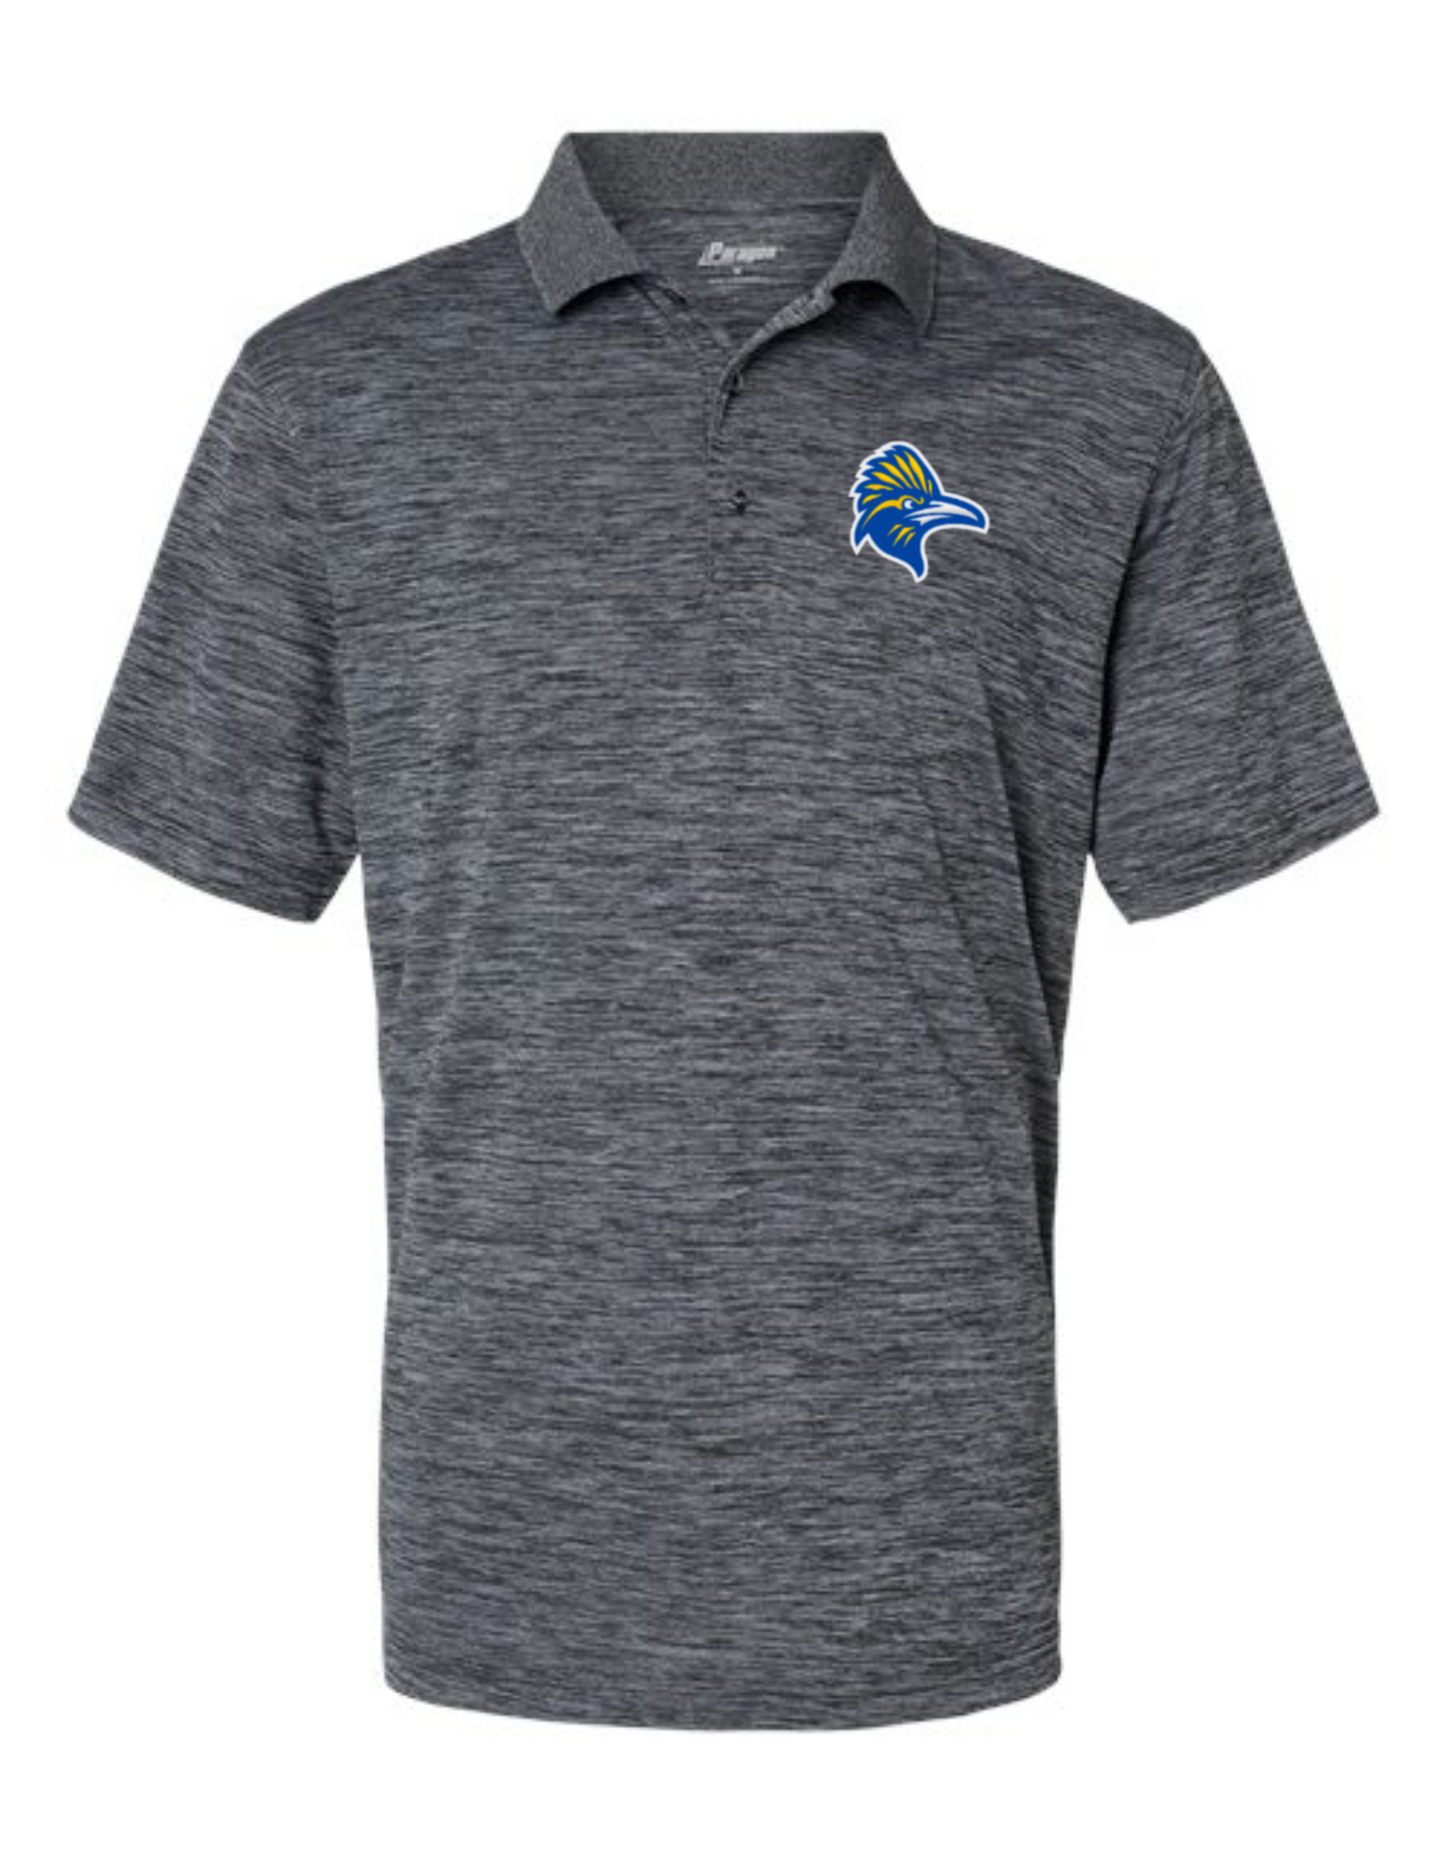 Mens Paragon Polo, in multiple colors